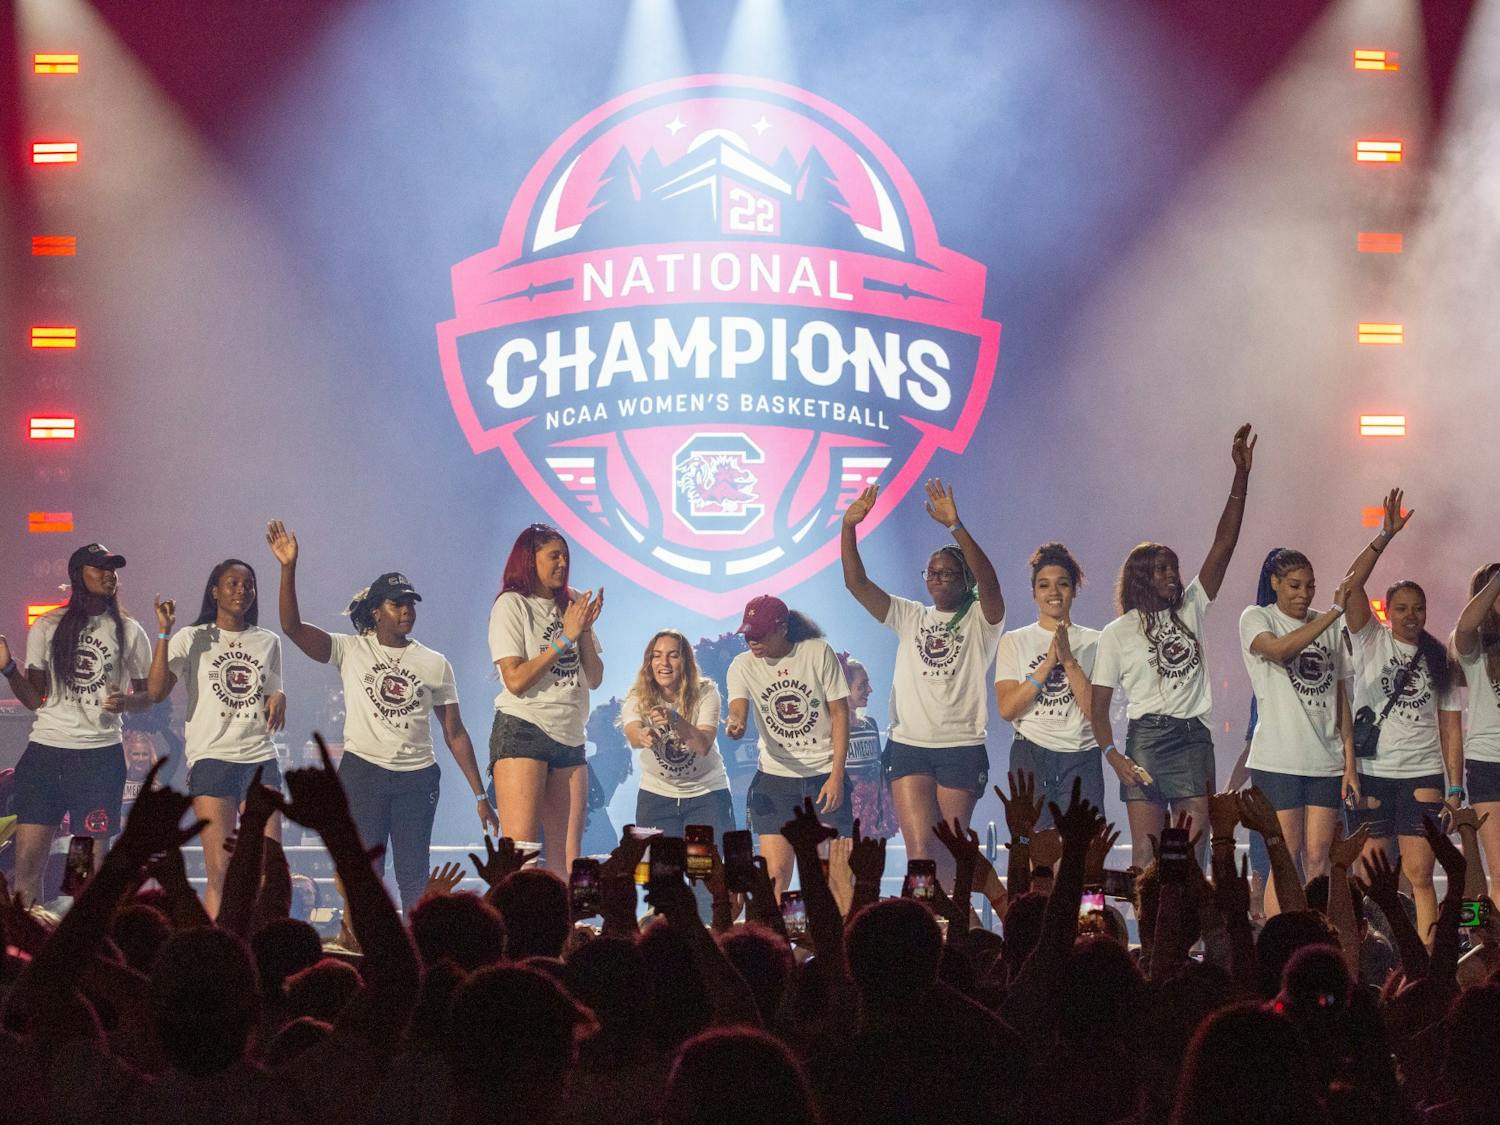 The South Carolina women’s basketball team is recognized for their national championship win at the Darius Rucker concert at Colonial Life Arena on April 24, 2022. The concert was held as a celebration for the women's basketball team.